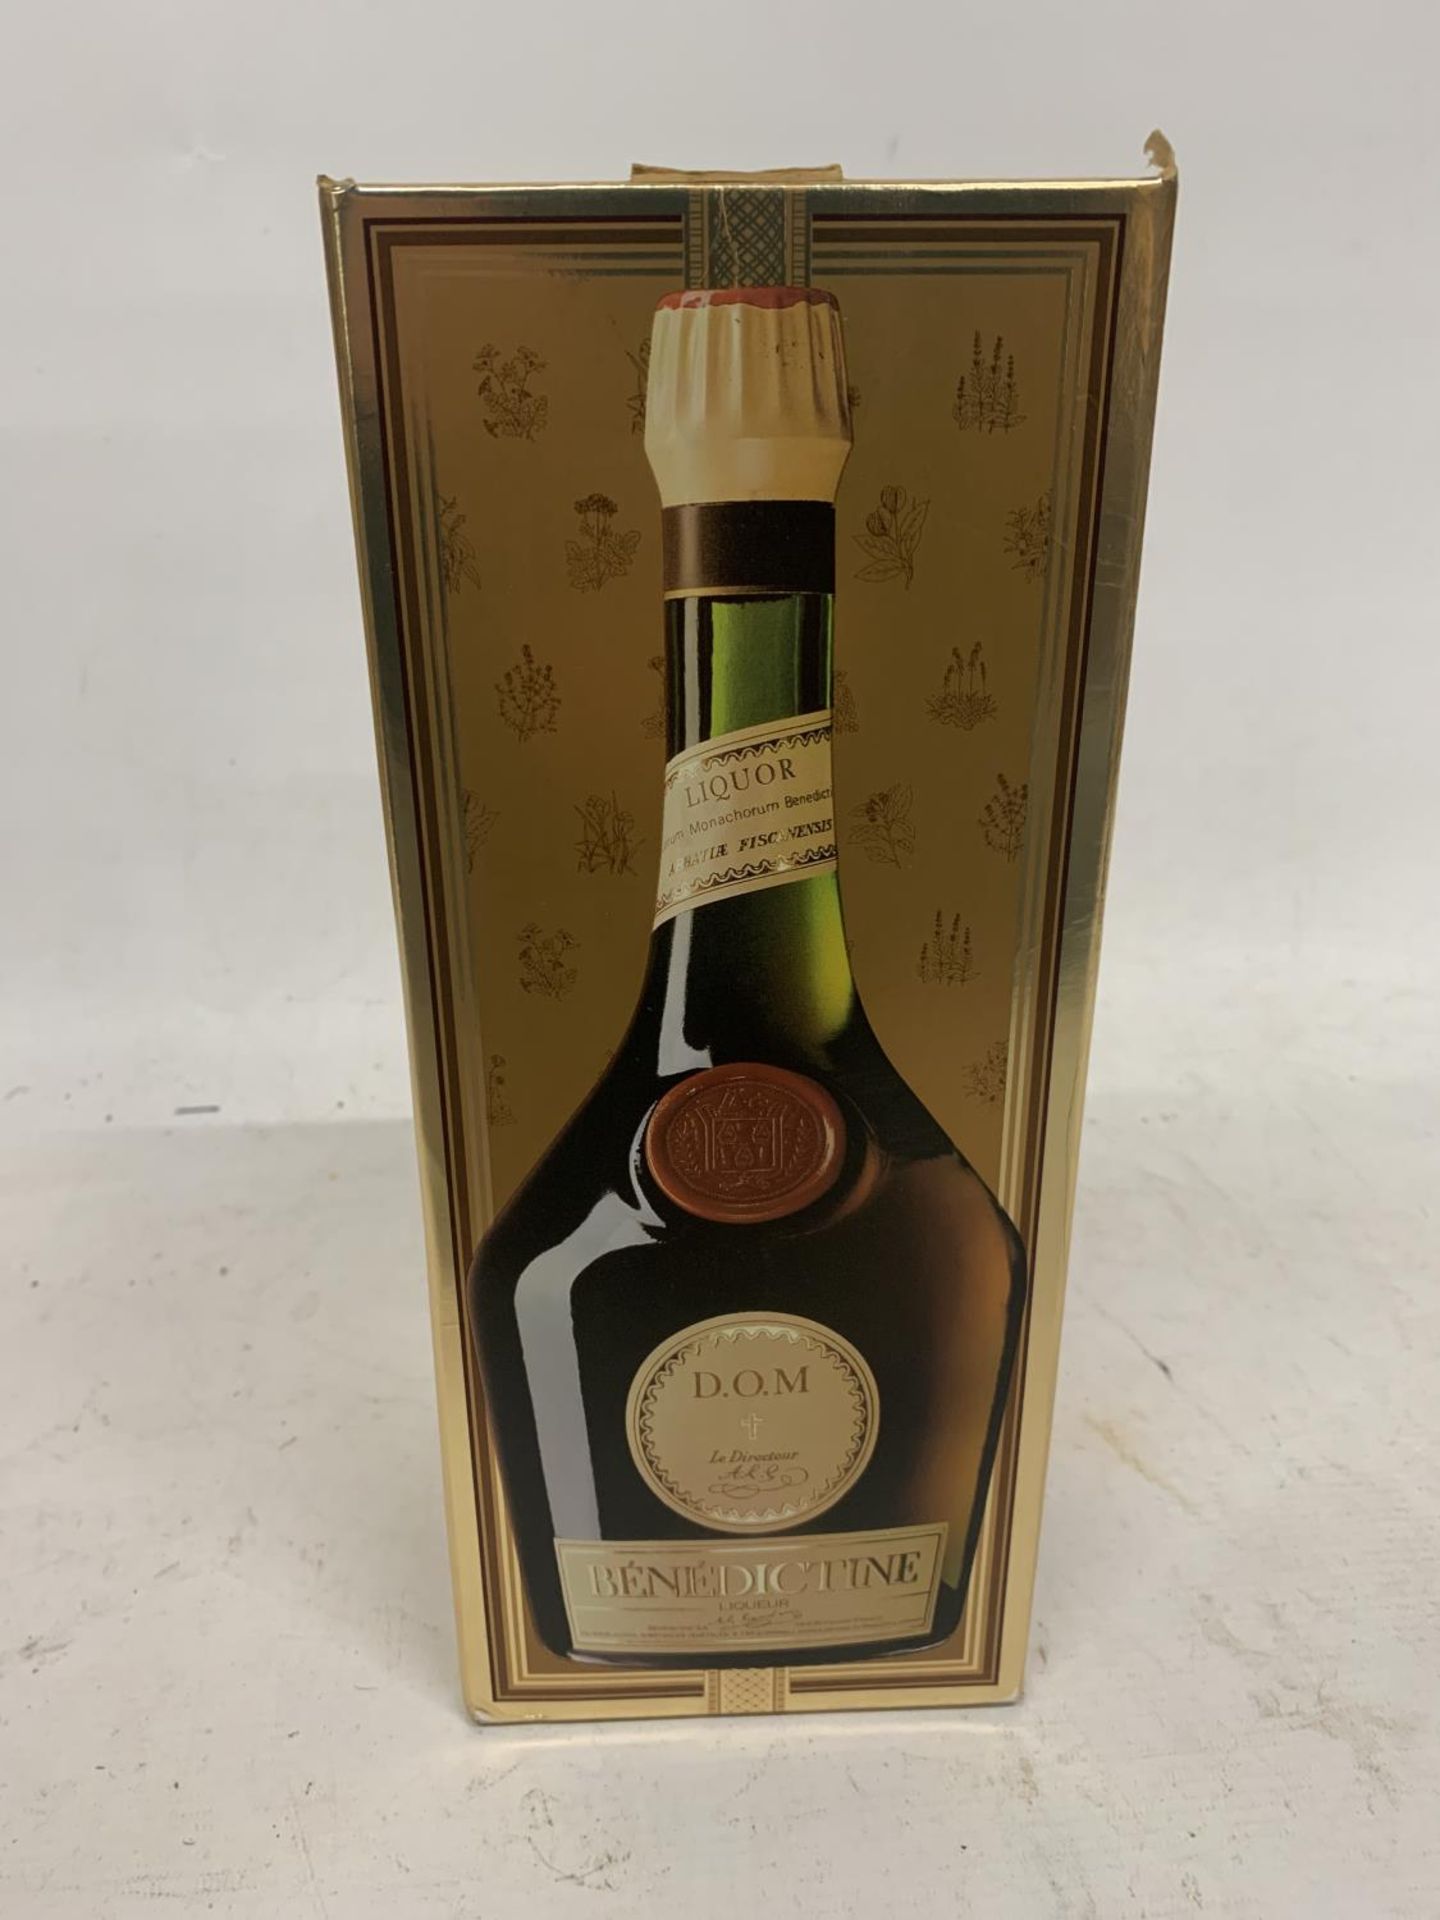 A 1 LITRE BOTTLE OF BENEDICTINE - BOXED